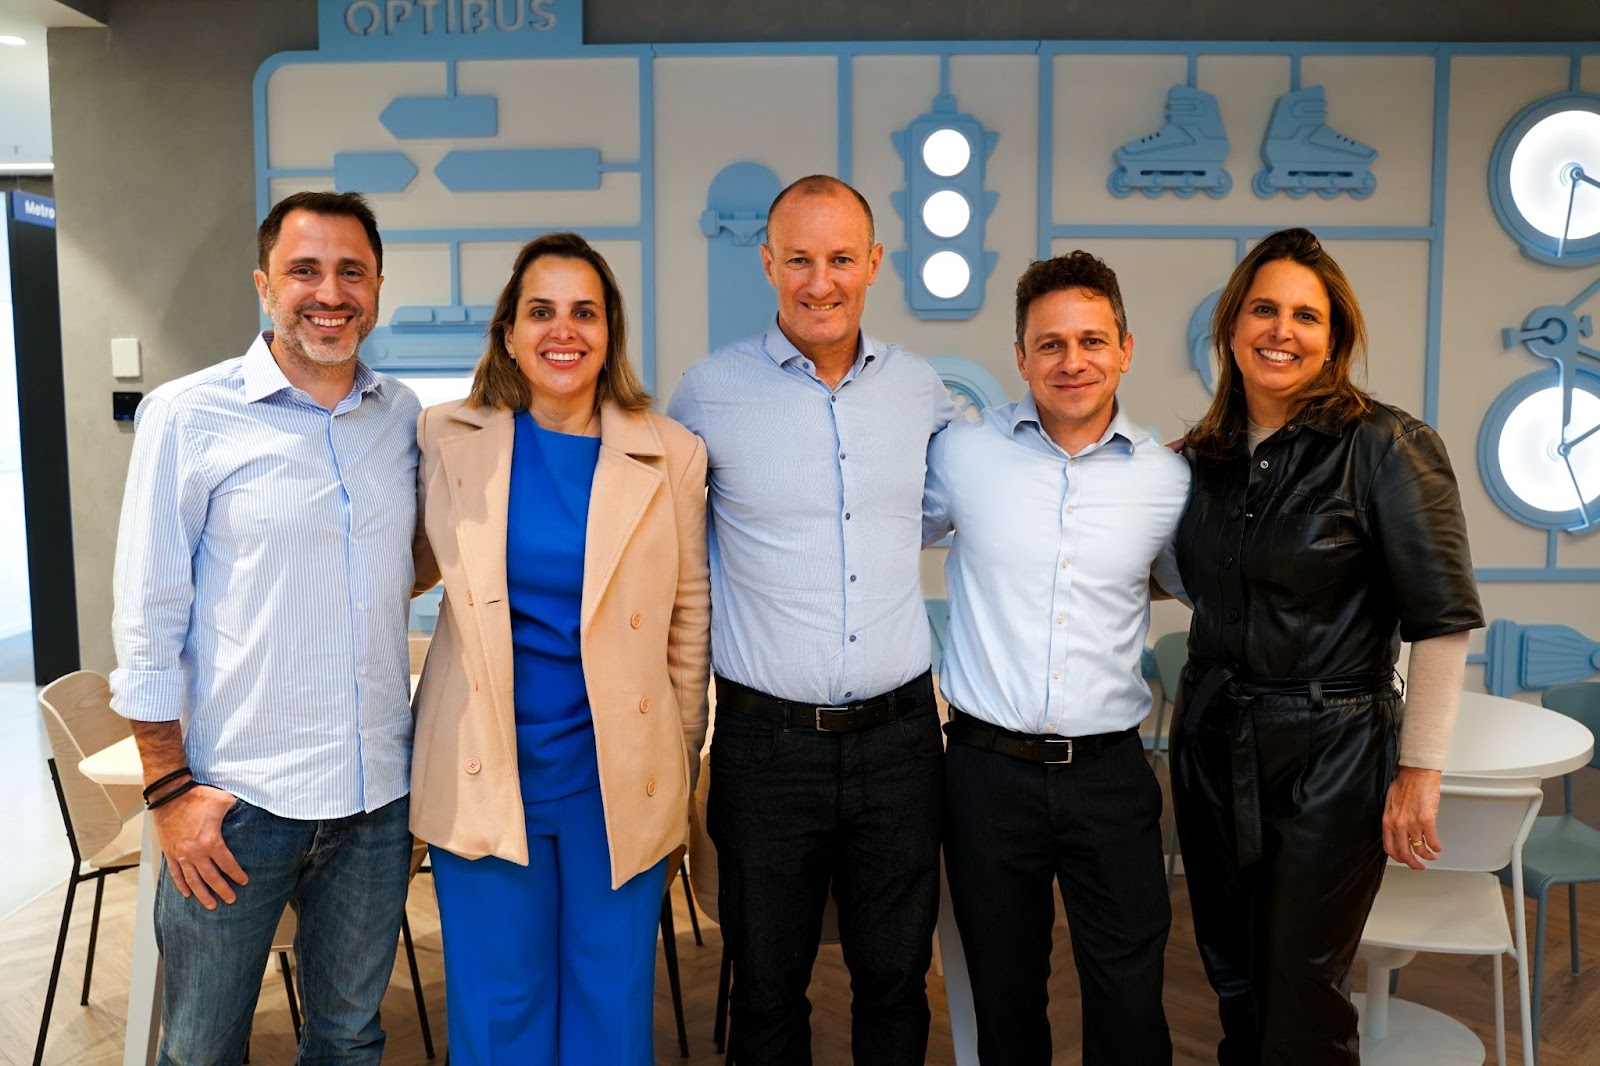 MobiBrasil visited Optibus’ headquarters to discuss strategies for bringing technological innovation to their operations. From Left to Right: Cesar Olmos, CEO of Cittamobi; Tatiana Chaves, partner at MobiBrasil; Ronen Avraham, General Manager LATAM at Optibus; Eitan Yanovsky, Optibus CTO and co-founder; and Niege Chaves, owner of MobiBrasil and founder of Cittamobi.